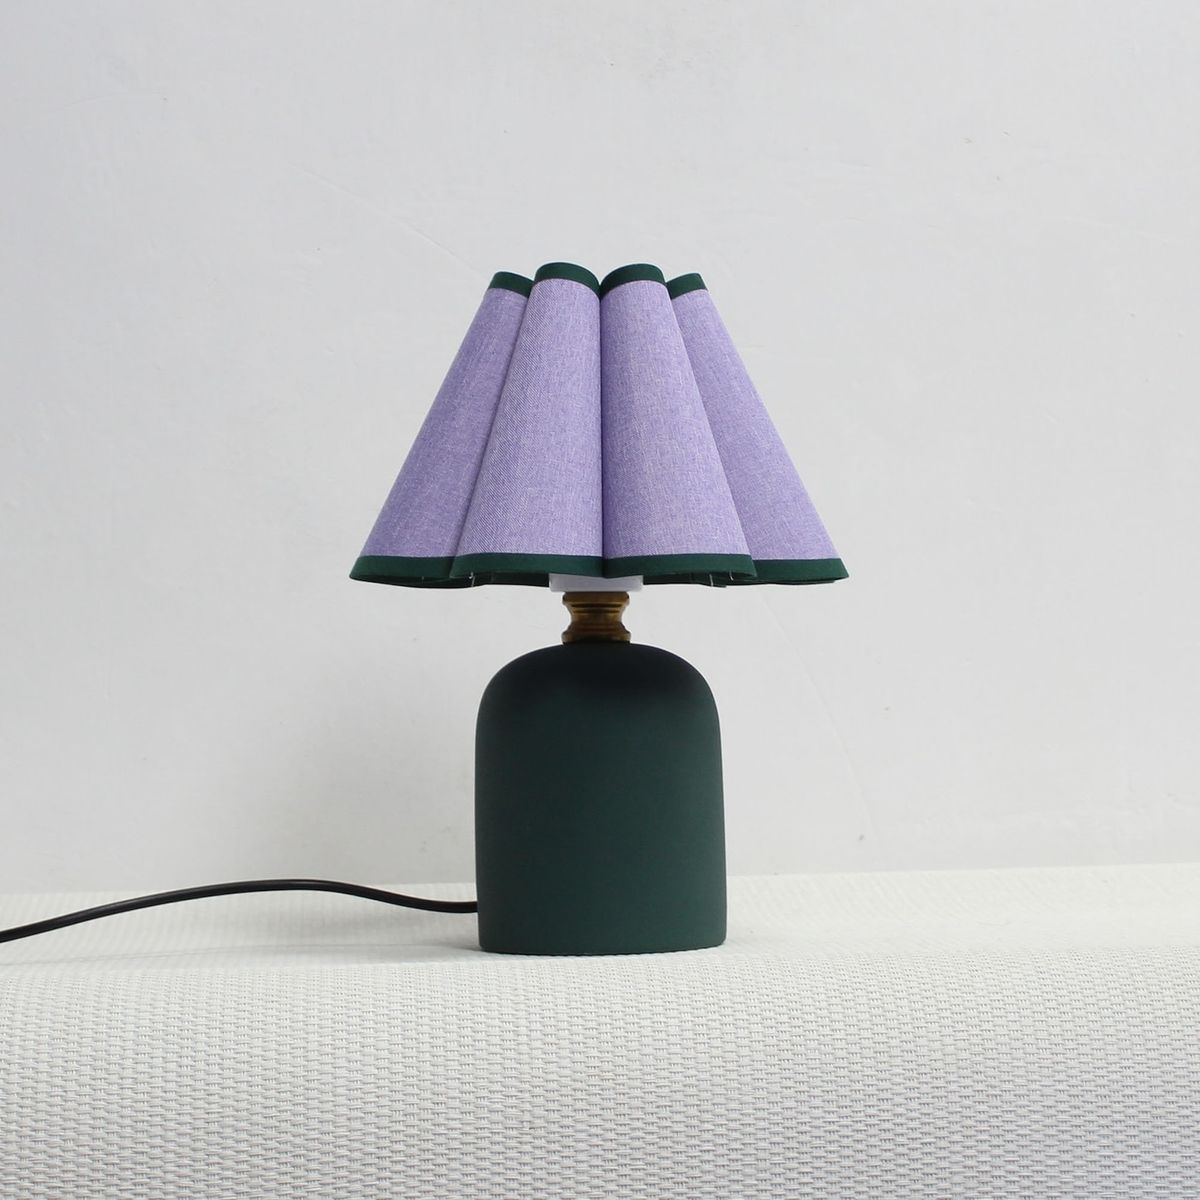 DuzyDesigns Handmade Scallop Shape Fabric and Acrylic with Ceramic Base Lamp